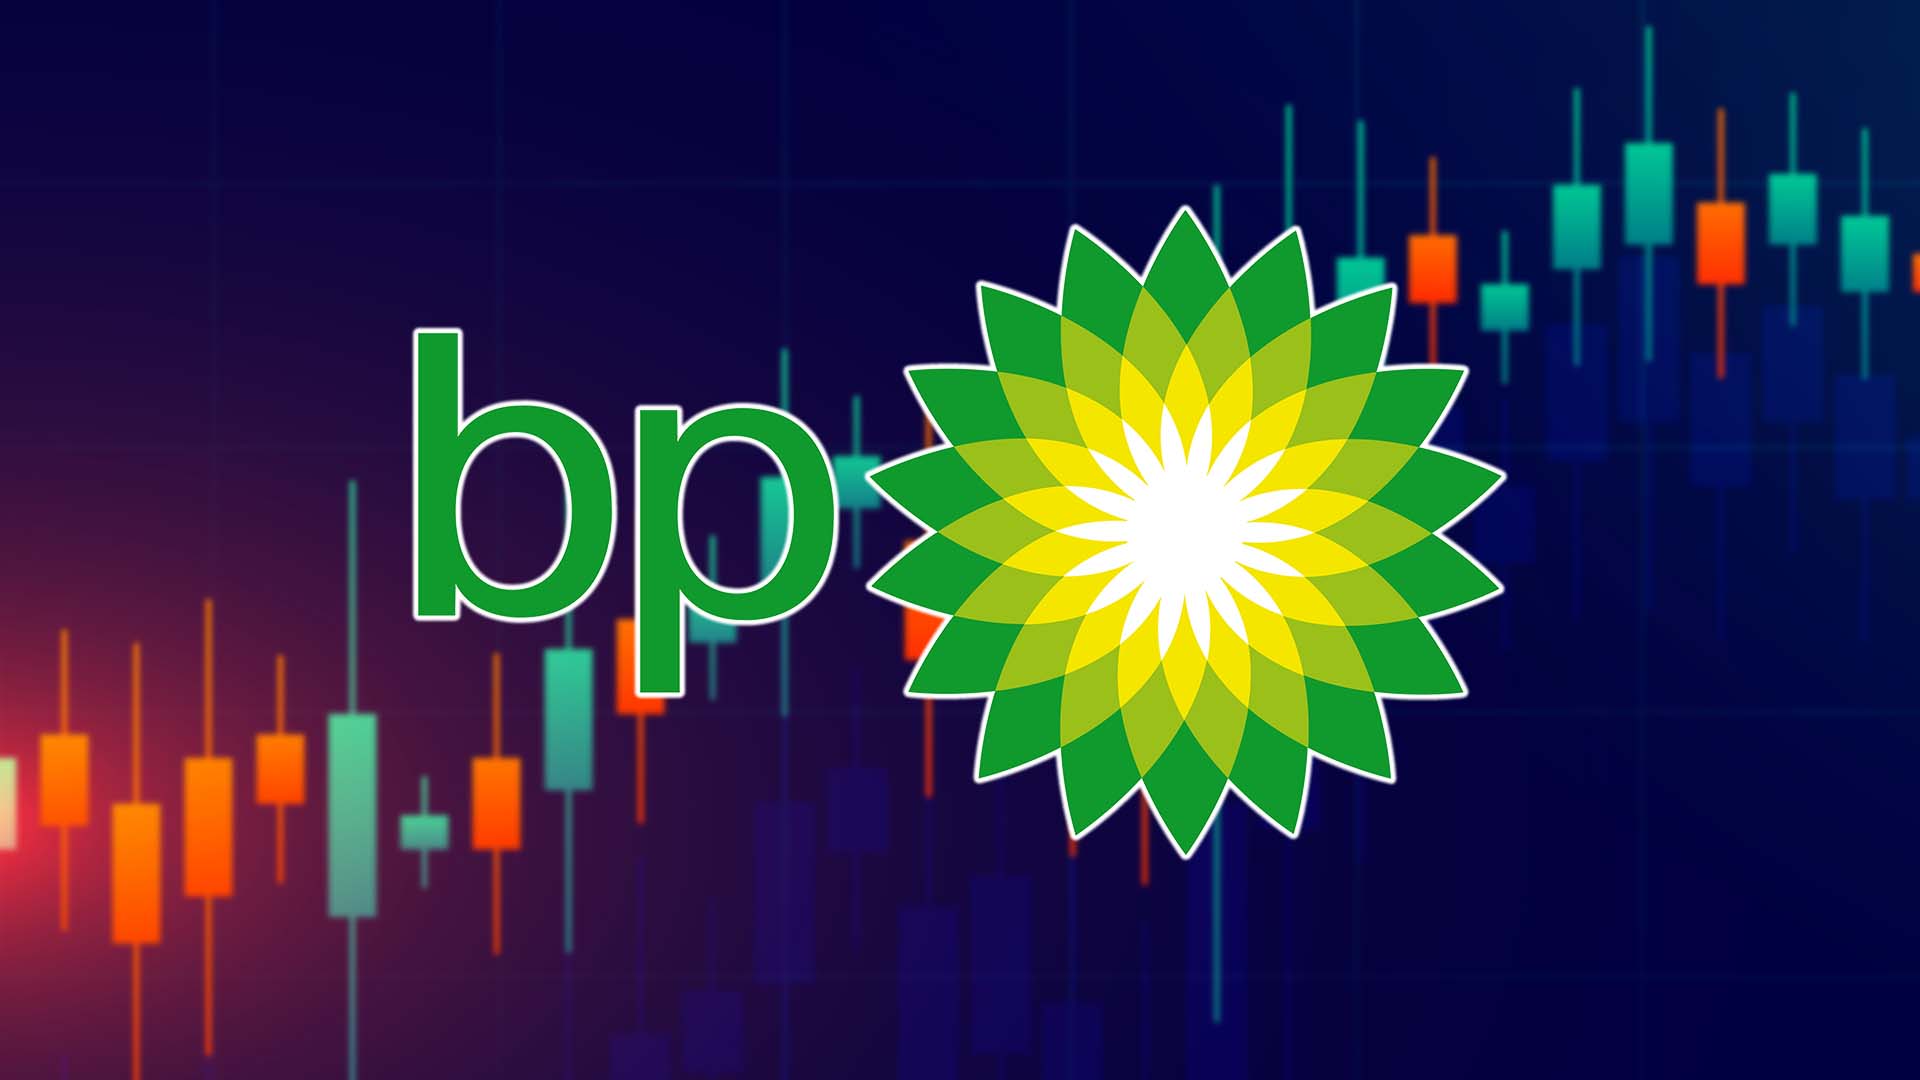 Bp Stock Price Sustained Above 200 DMA On 20 October, Wait for